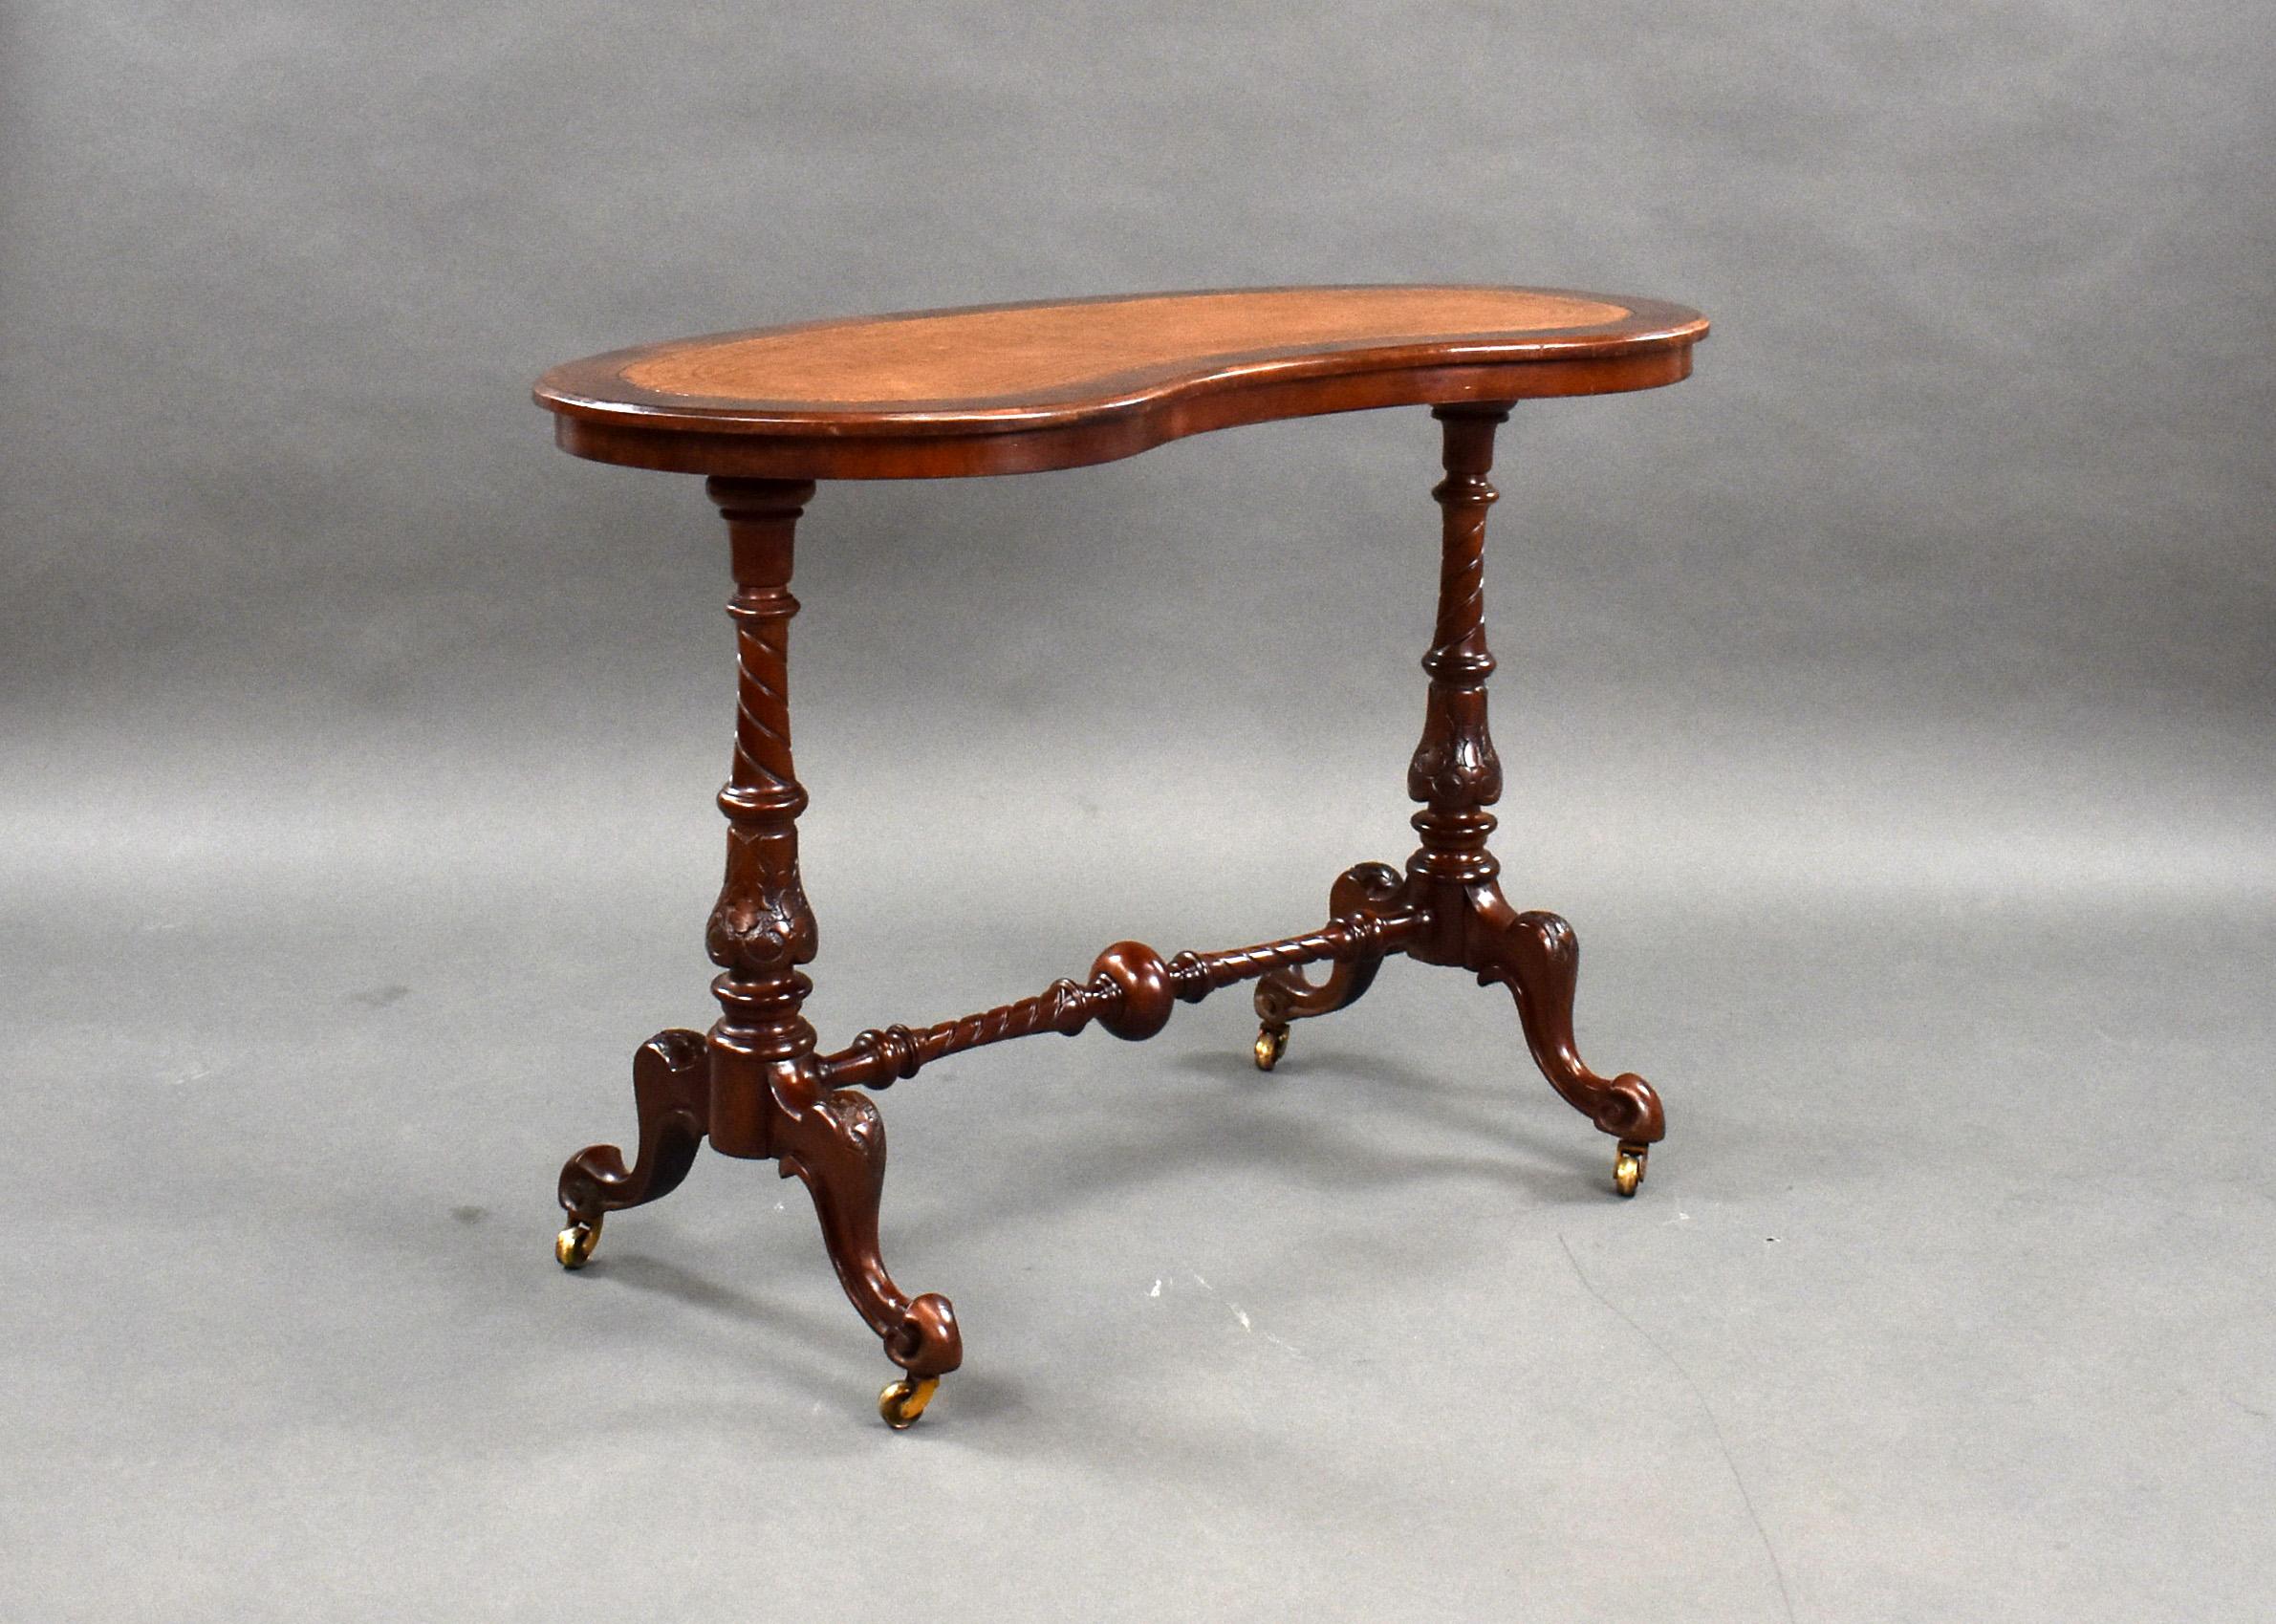 For sale is a good quality Victorian burr walnut writing table, having an inset leather top, with two turned and carved legs united by a central stretcher, standing on scroll feet raised on castors. This piece is in very good condition for its age.